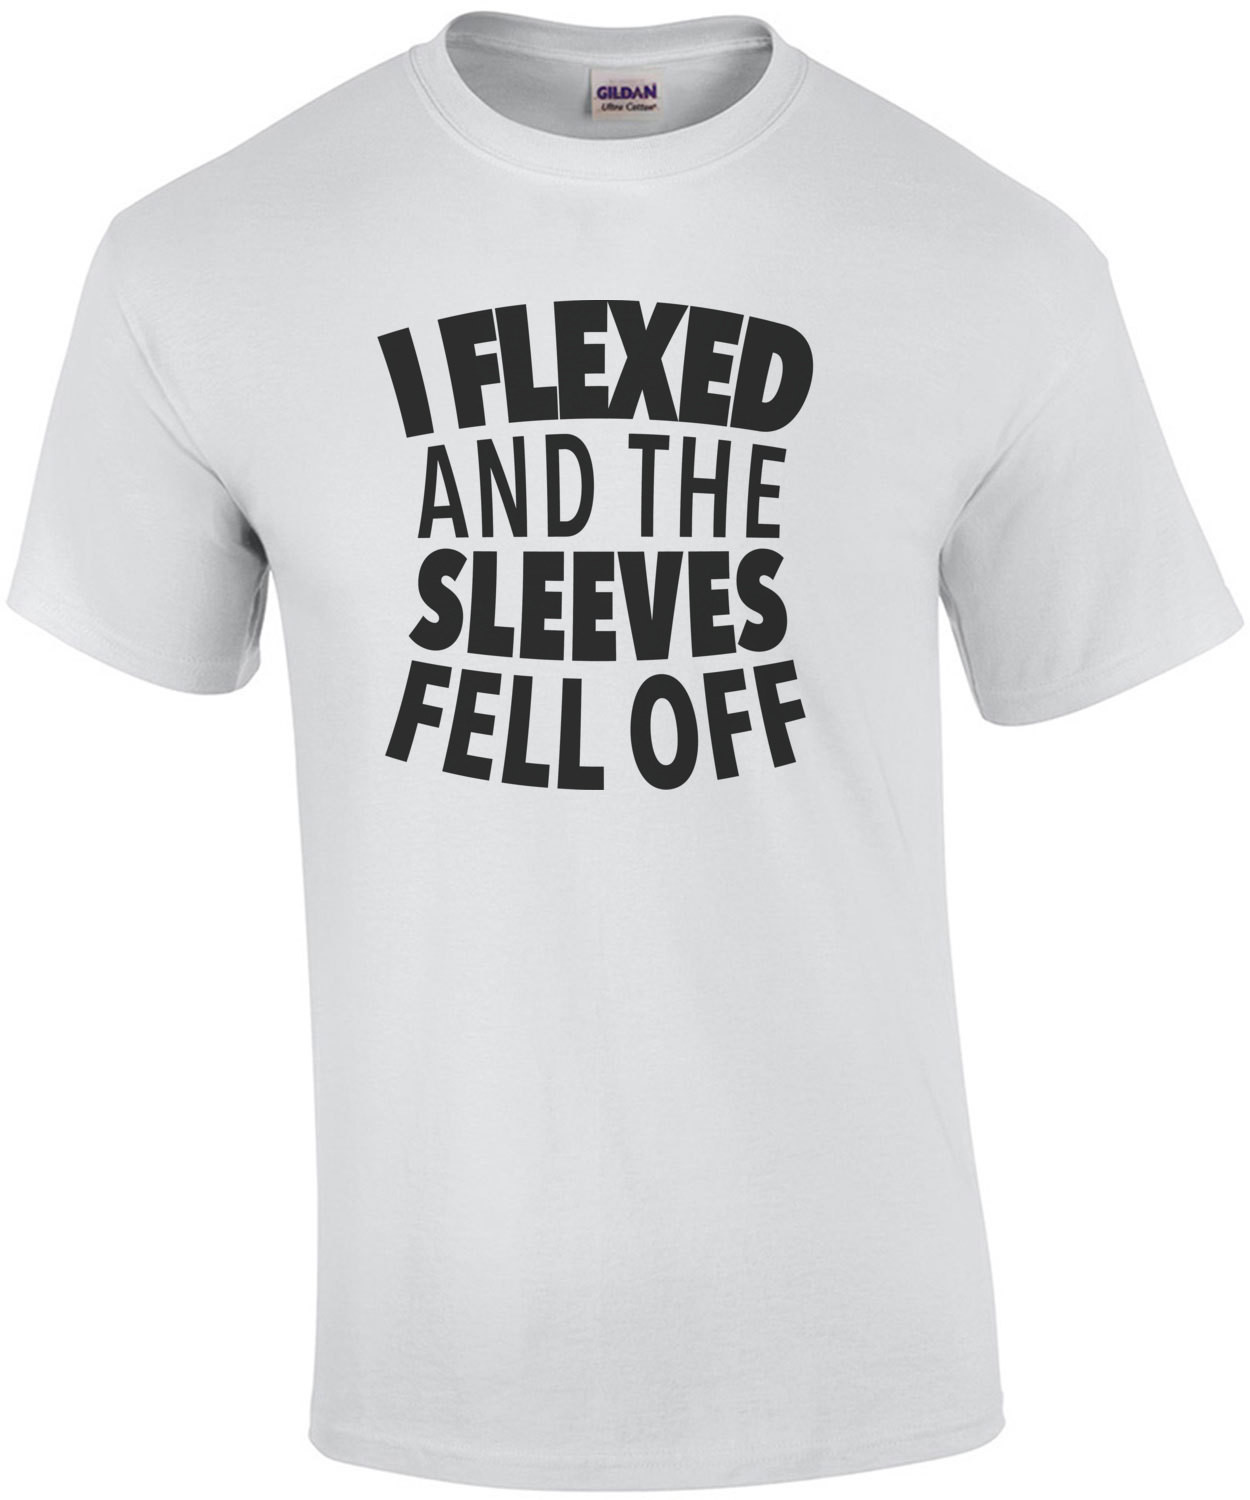 I flexed and the sleeves fell off - funny t-shirt